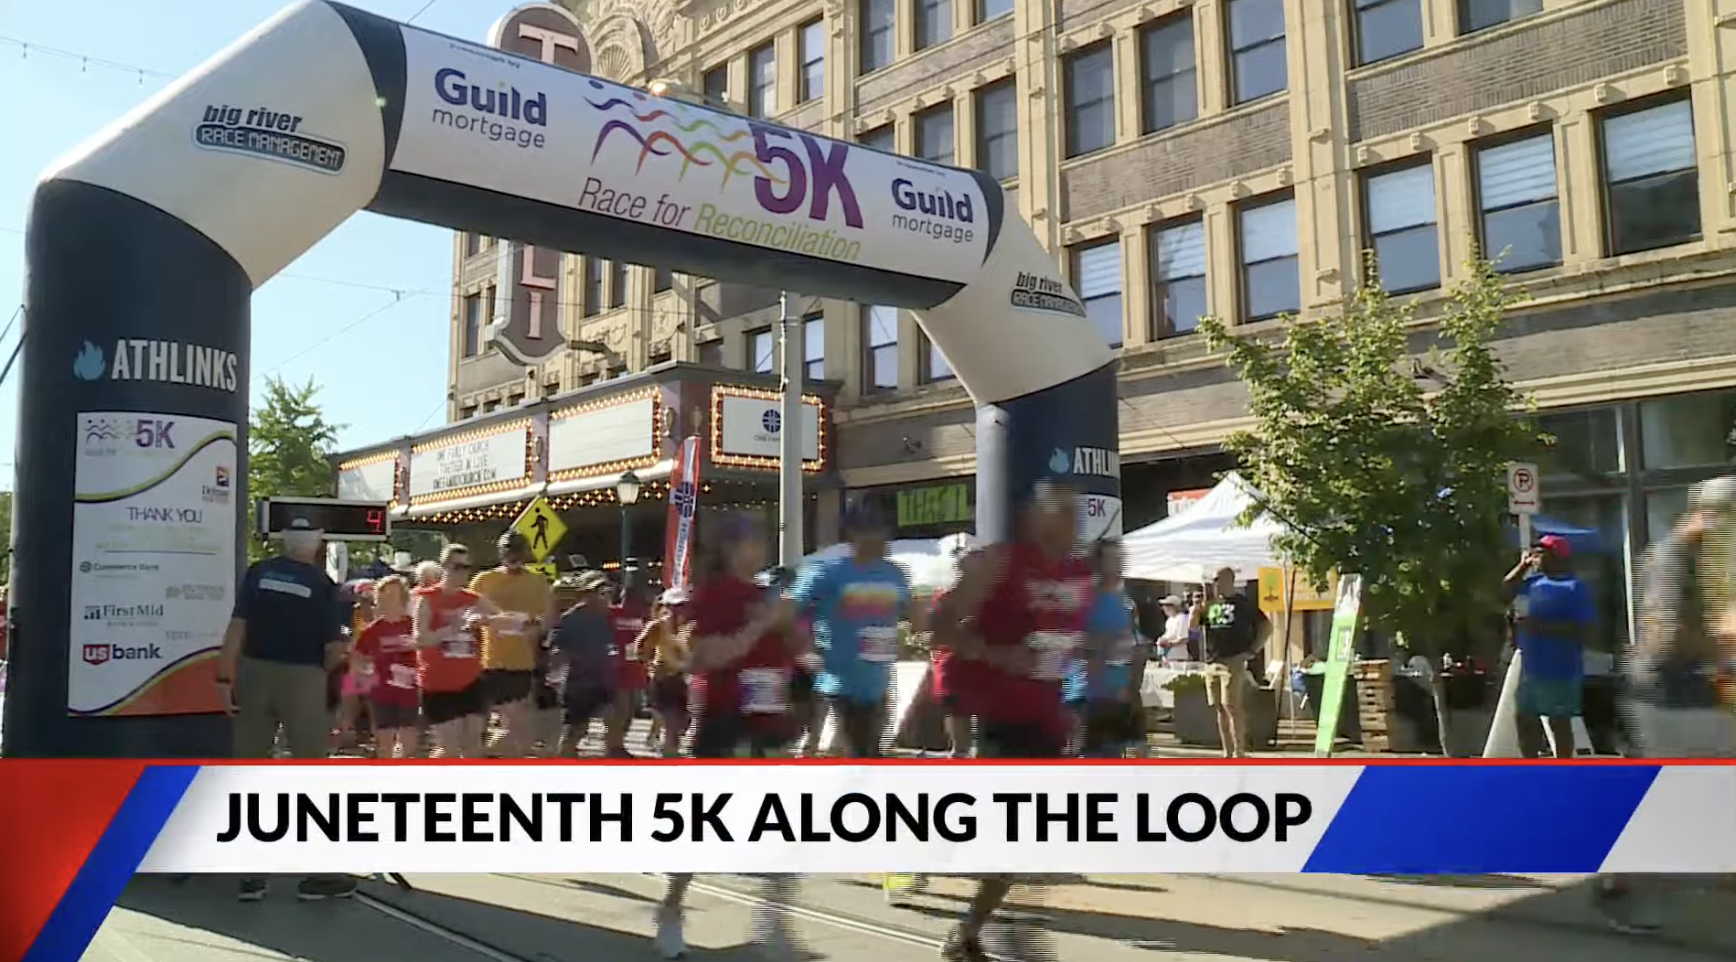 Juneteenth celebrations at Delmar Loop include 5K, food and concerts